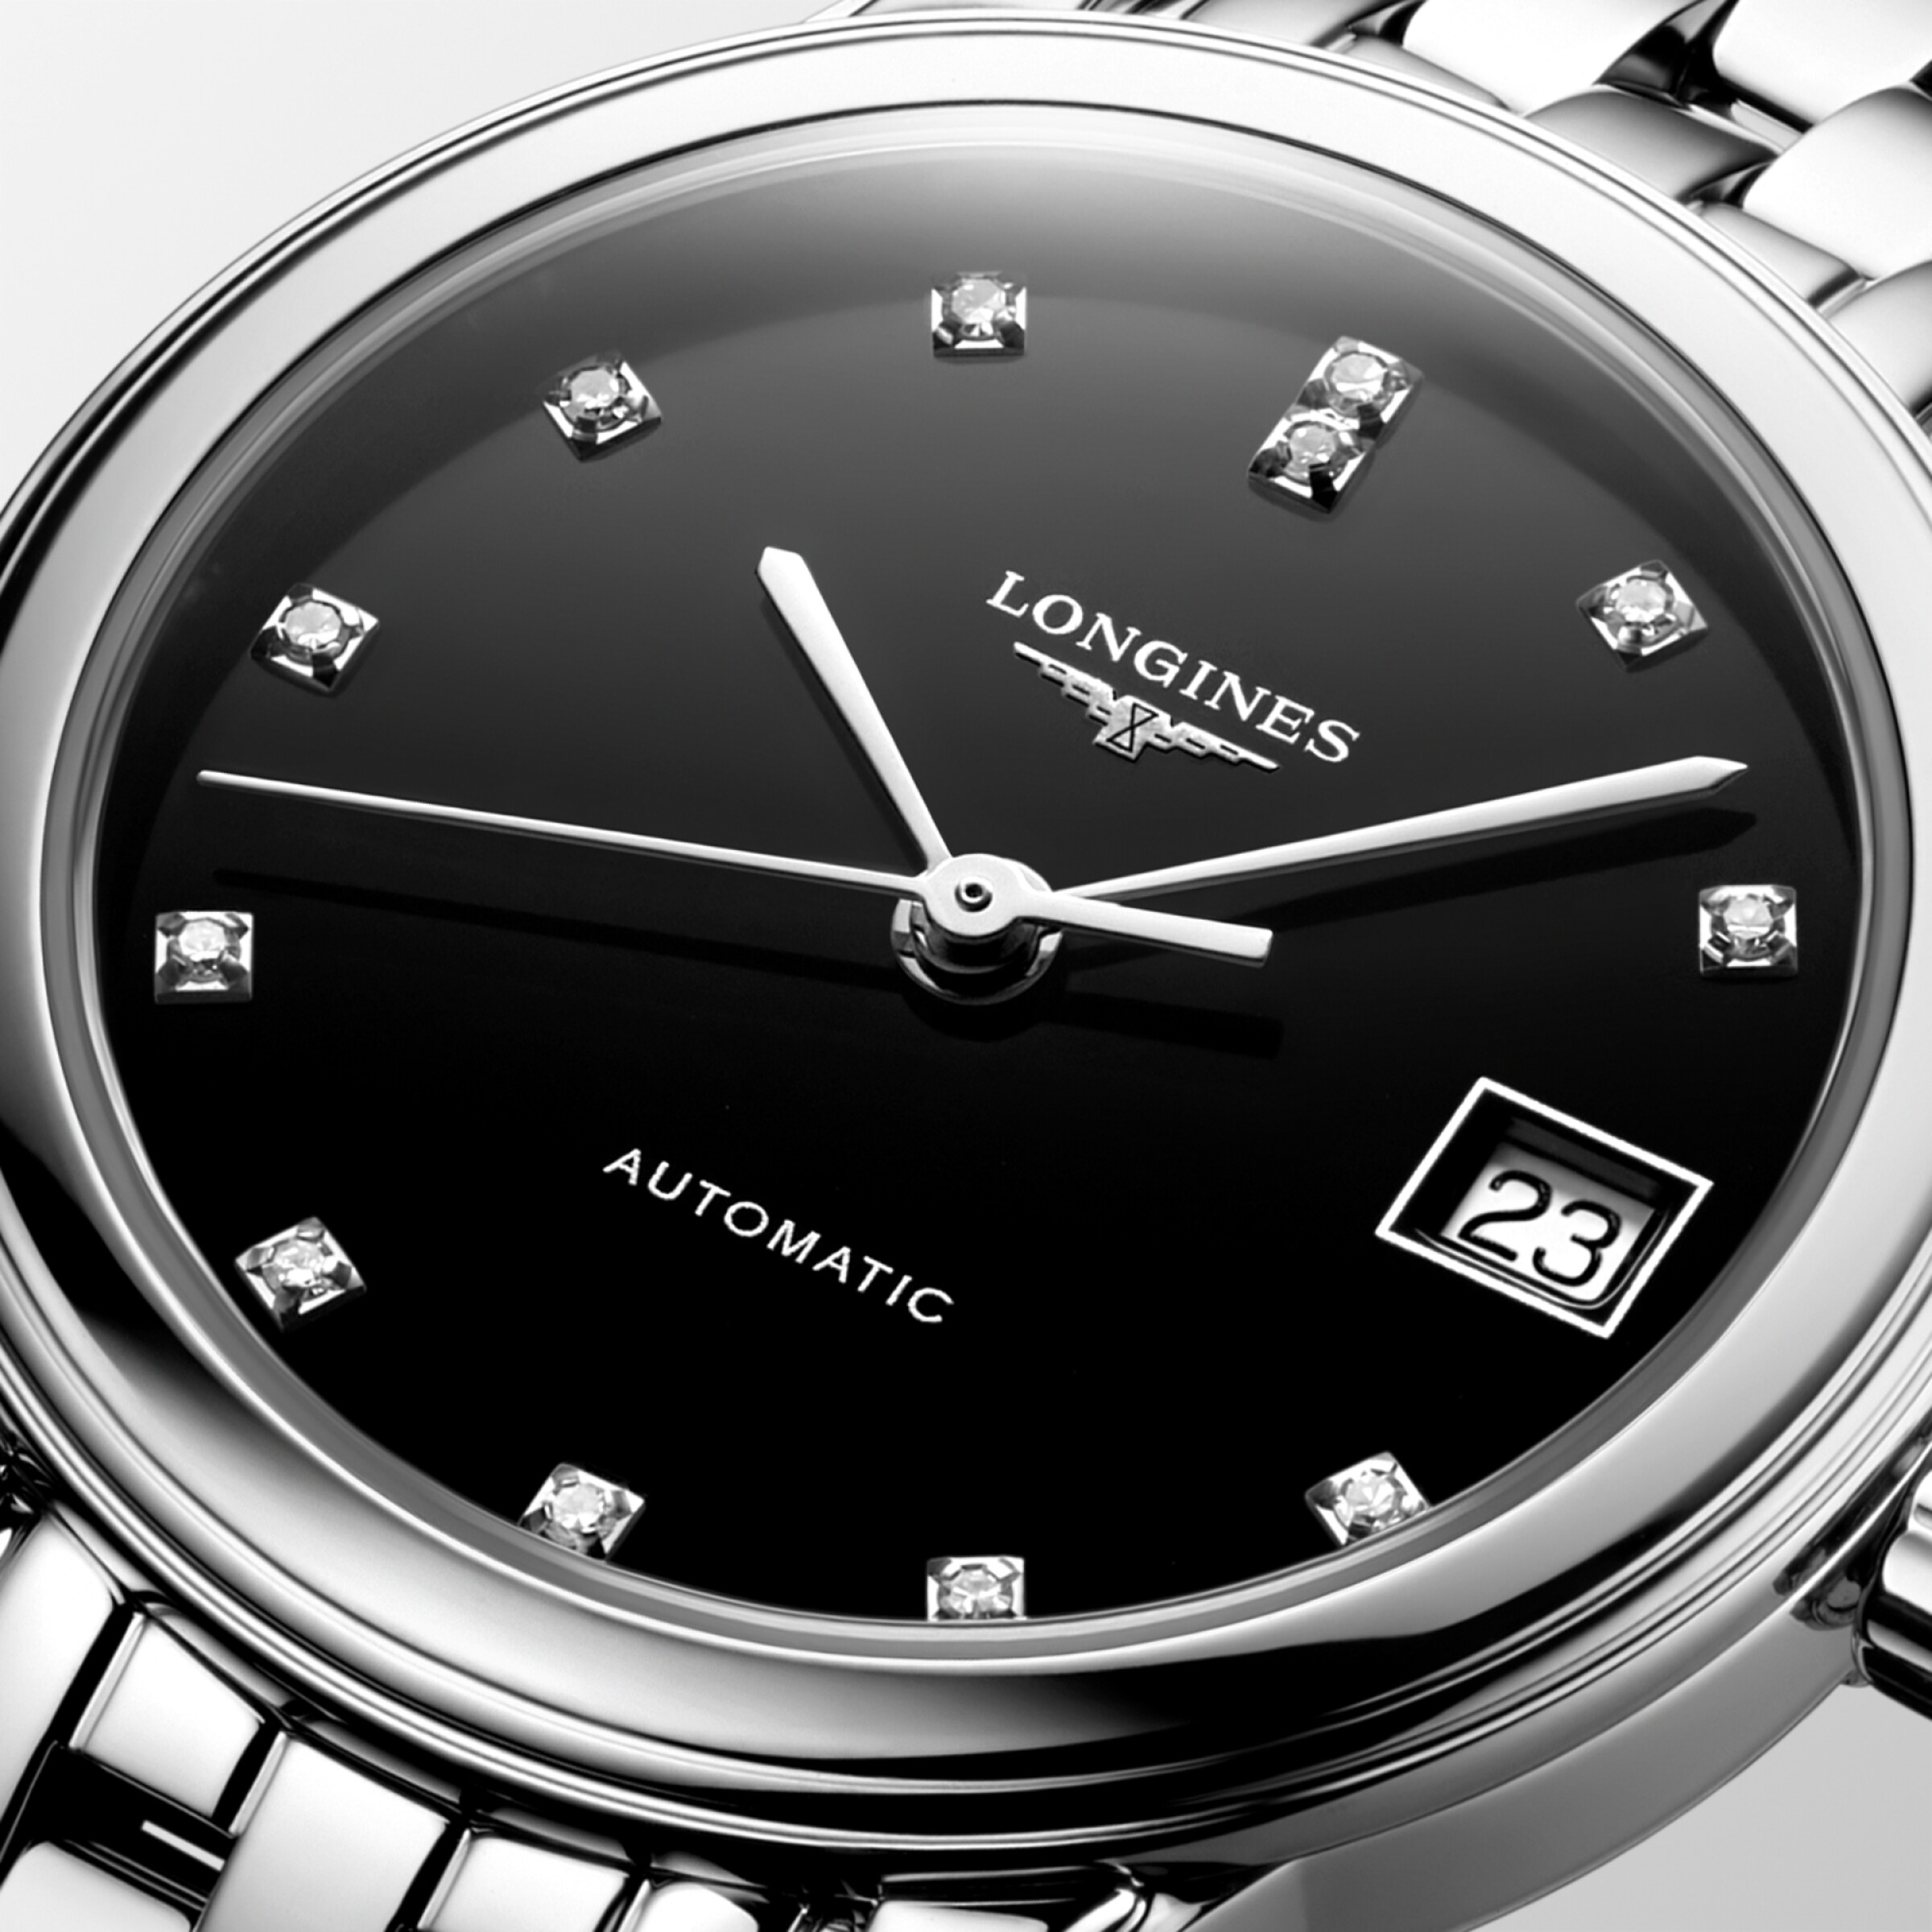 Longines FLAGSHIP Automatic Stainless steel Watch - L4.274.4.57.6